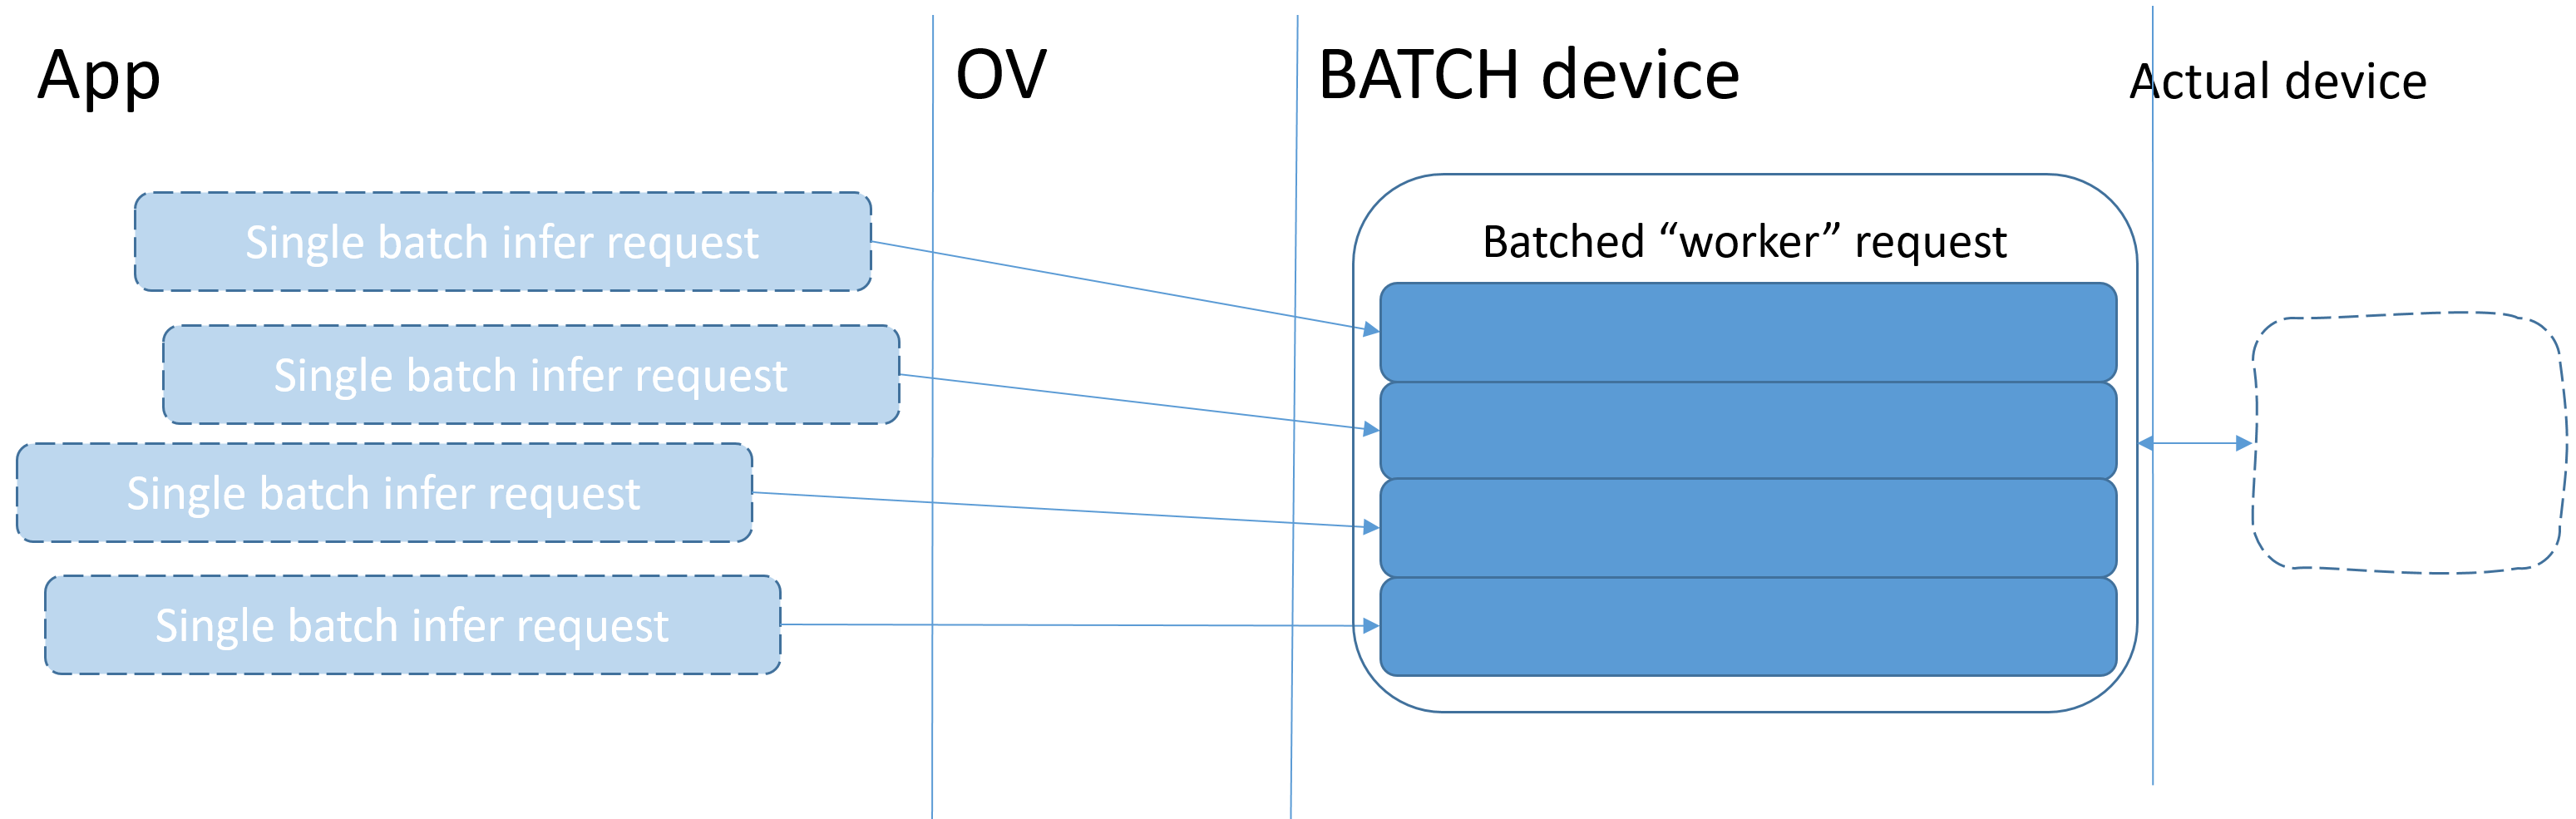 _images/BATCH_device.PNG